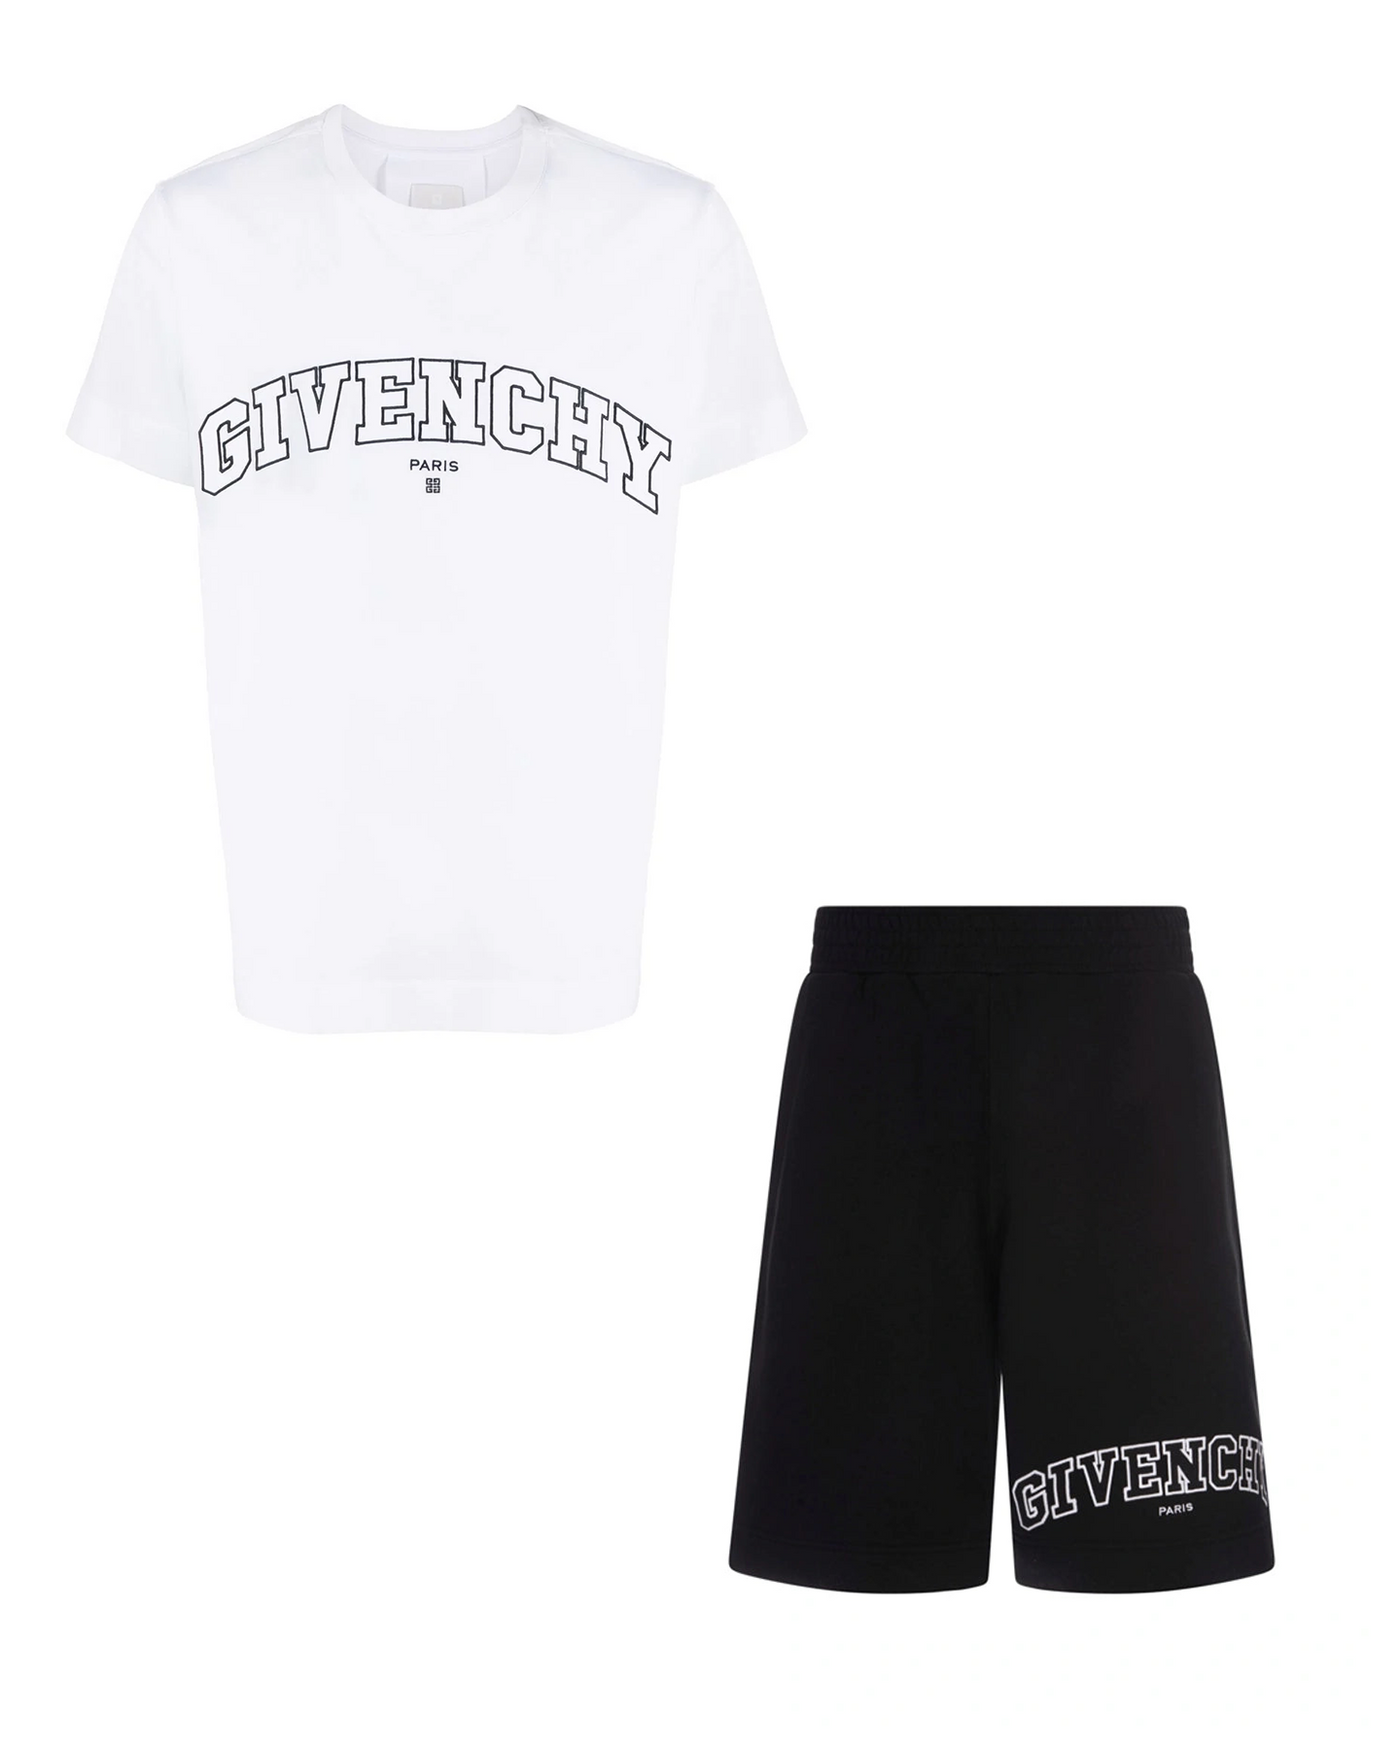 Givenchy Logo Embroidered T-Shirt & Shorts Set in White/Black